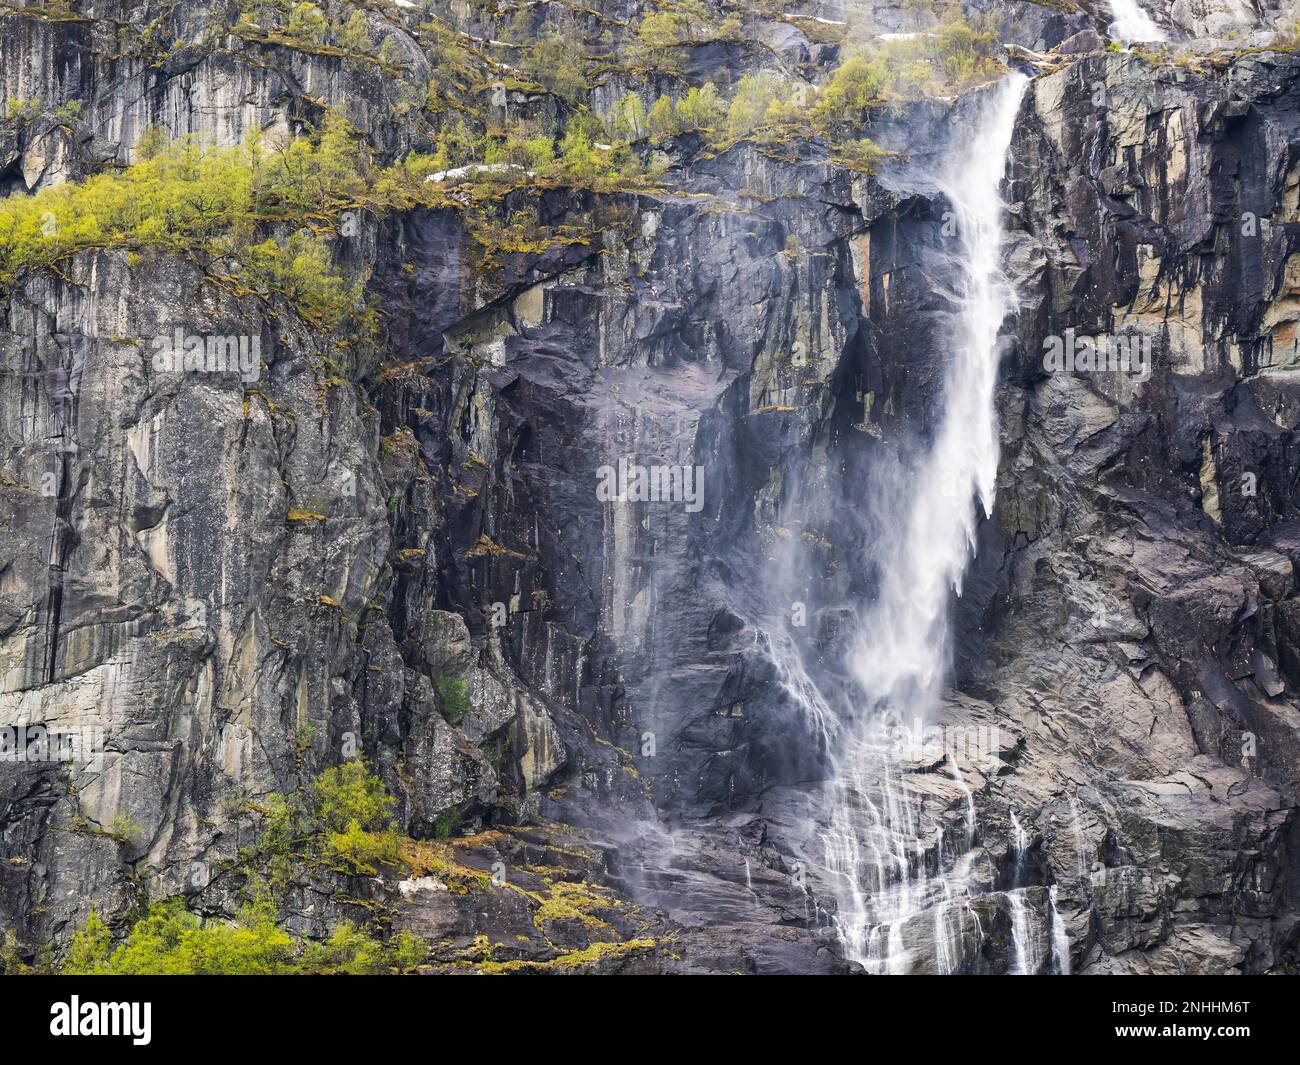 A view of a waterfall on the steep wall of mountains with the Myklebustbreen glacier at the top, Norway. Stock Photo